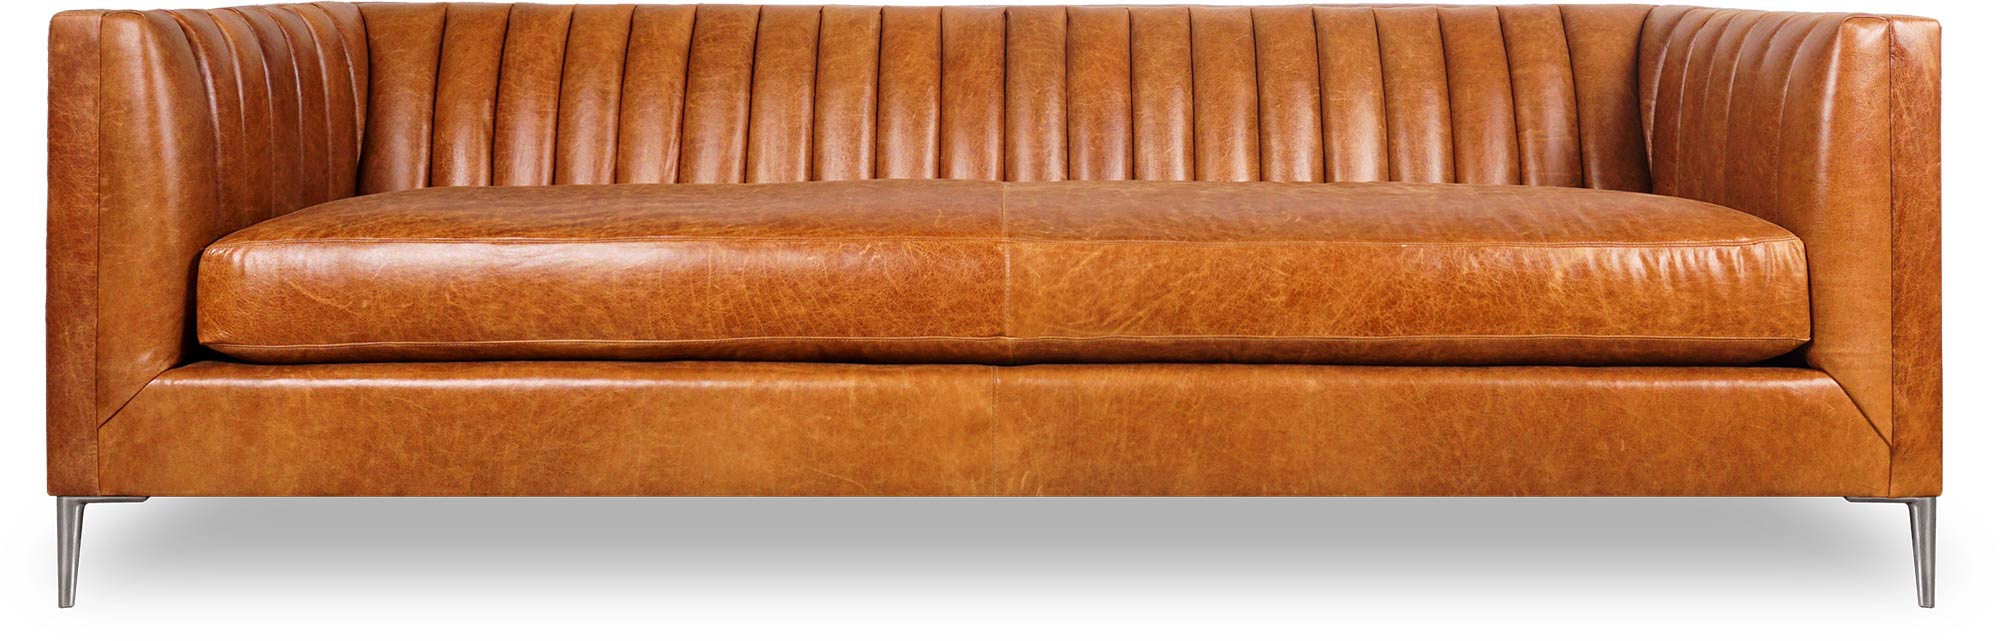 93 Harley channel-tufted sofa in Caprieze Copper Glaze leather with bench cushion and aluminum legs